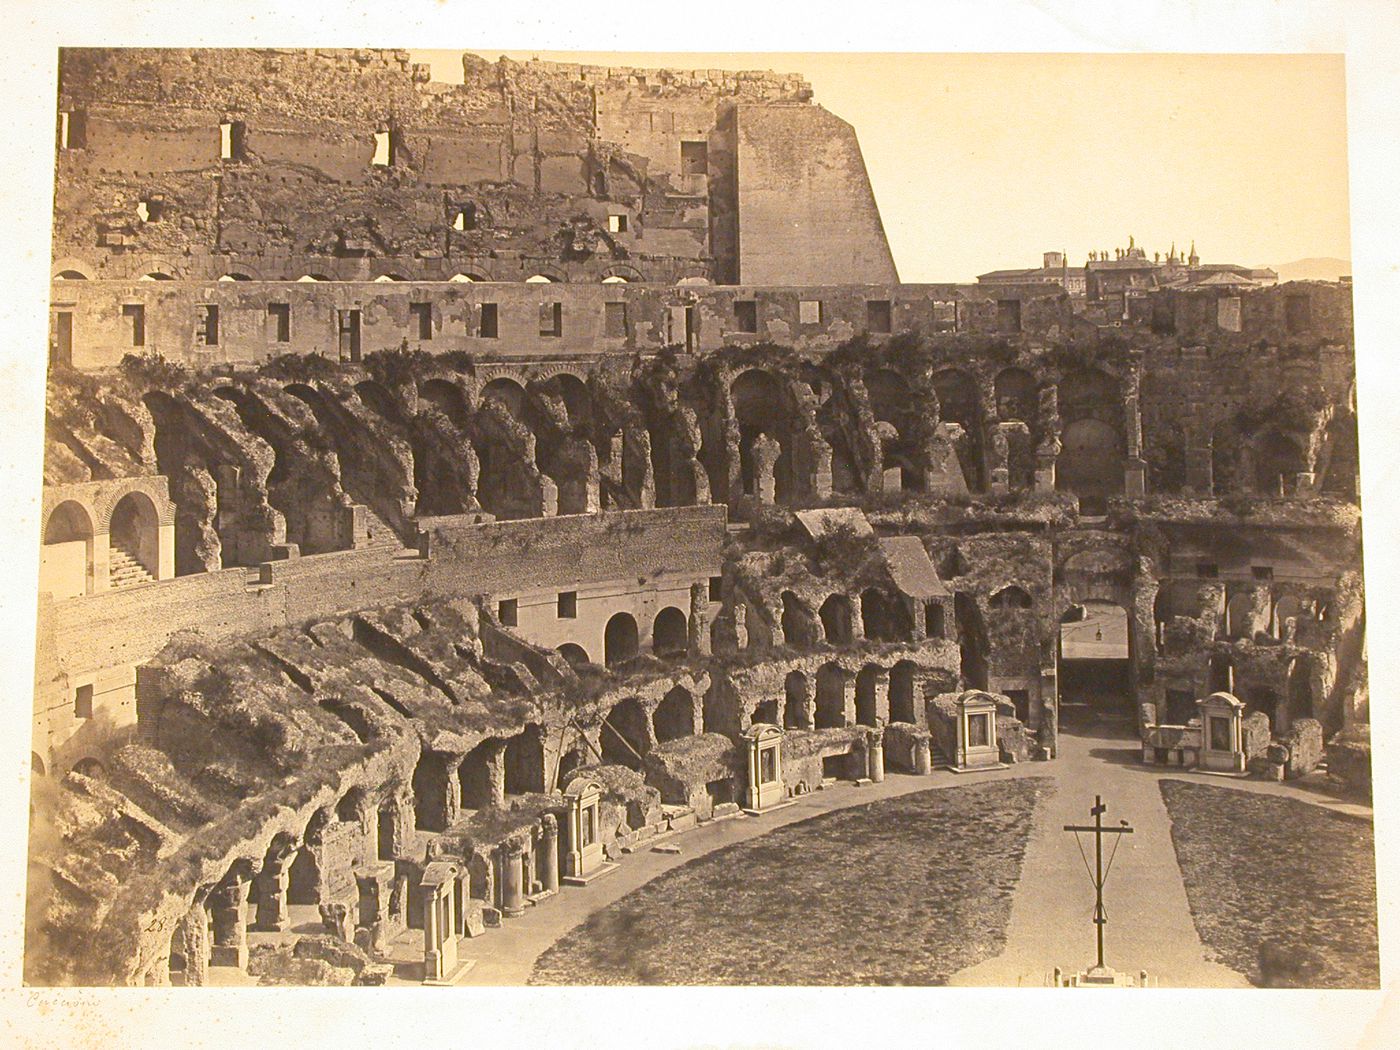 View of coliseum, Rome, Italy